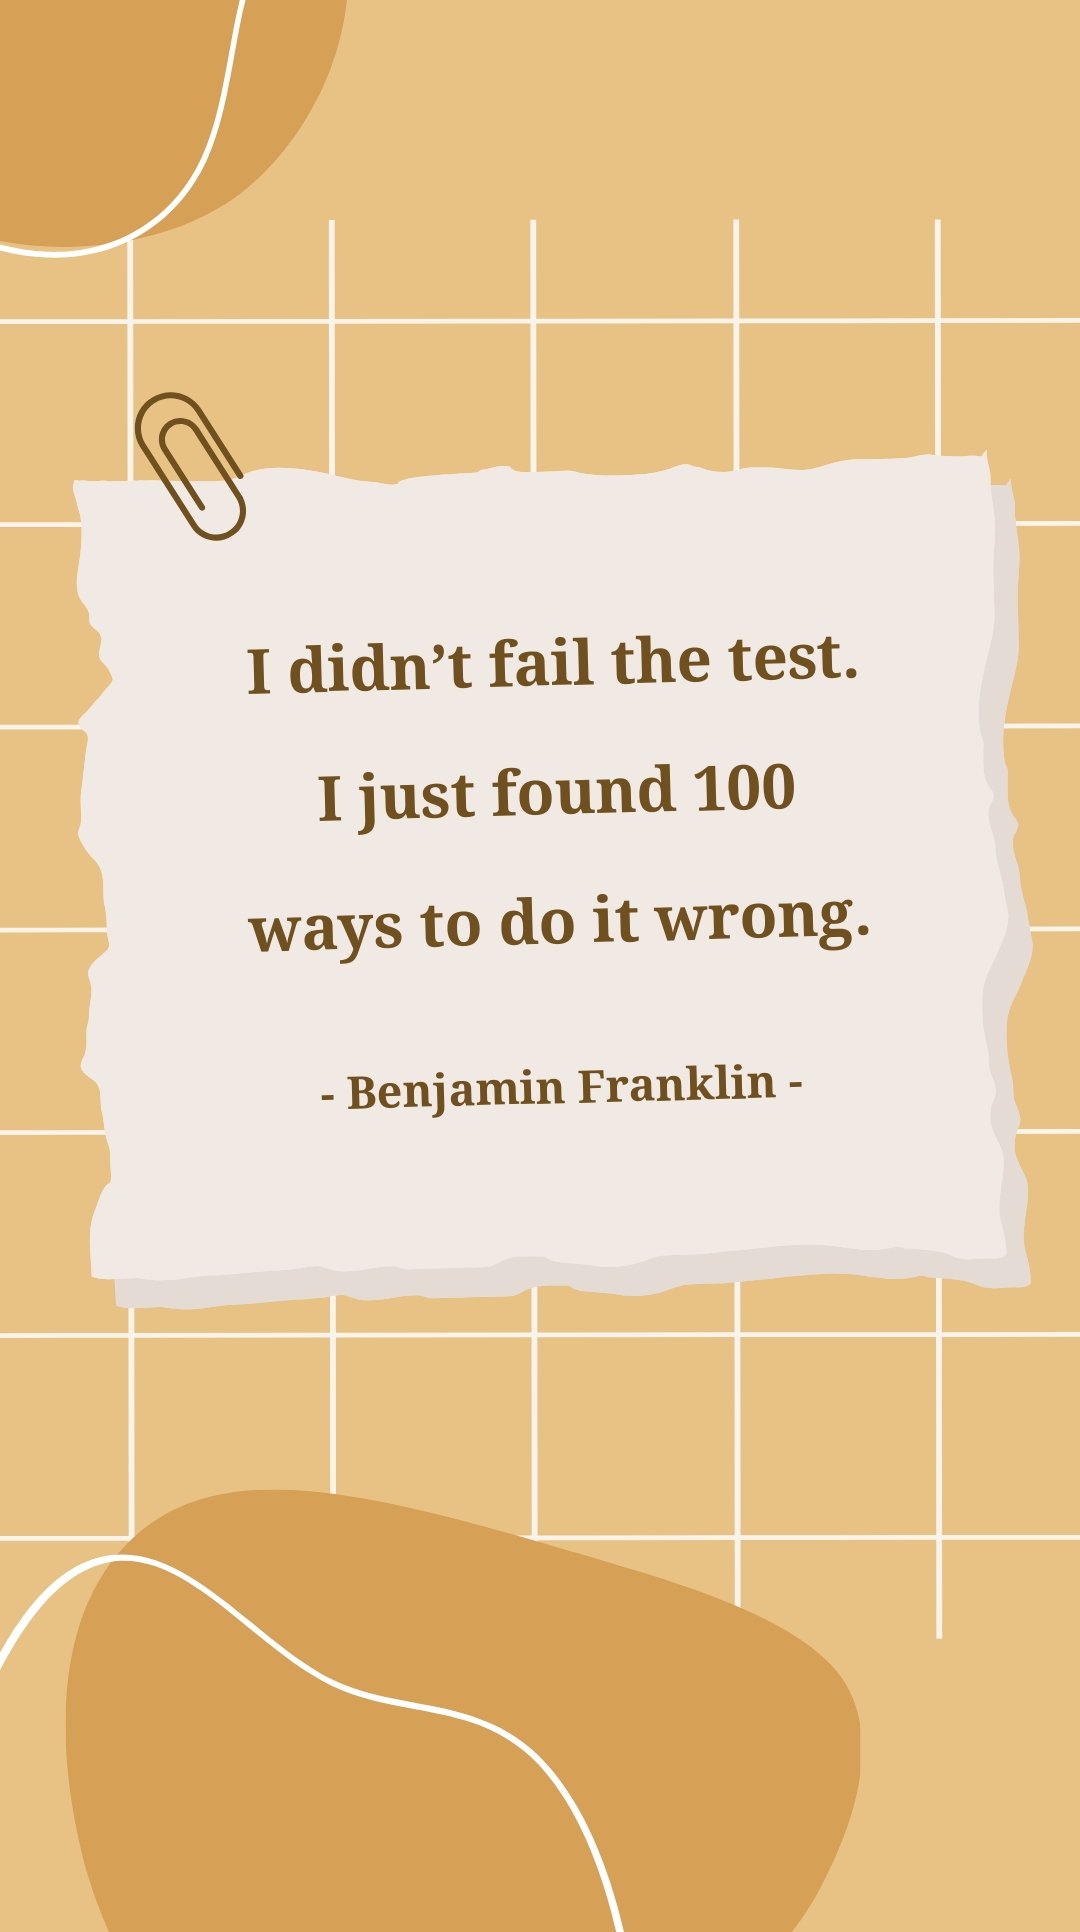 Benjamin Franklin - I didn’t fail the test. I just found 100 ways to do it wrong.